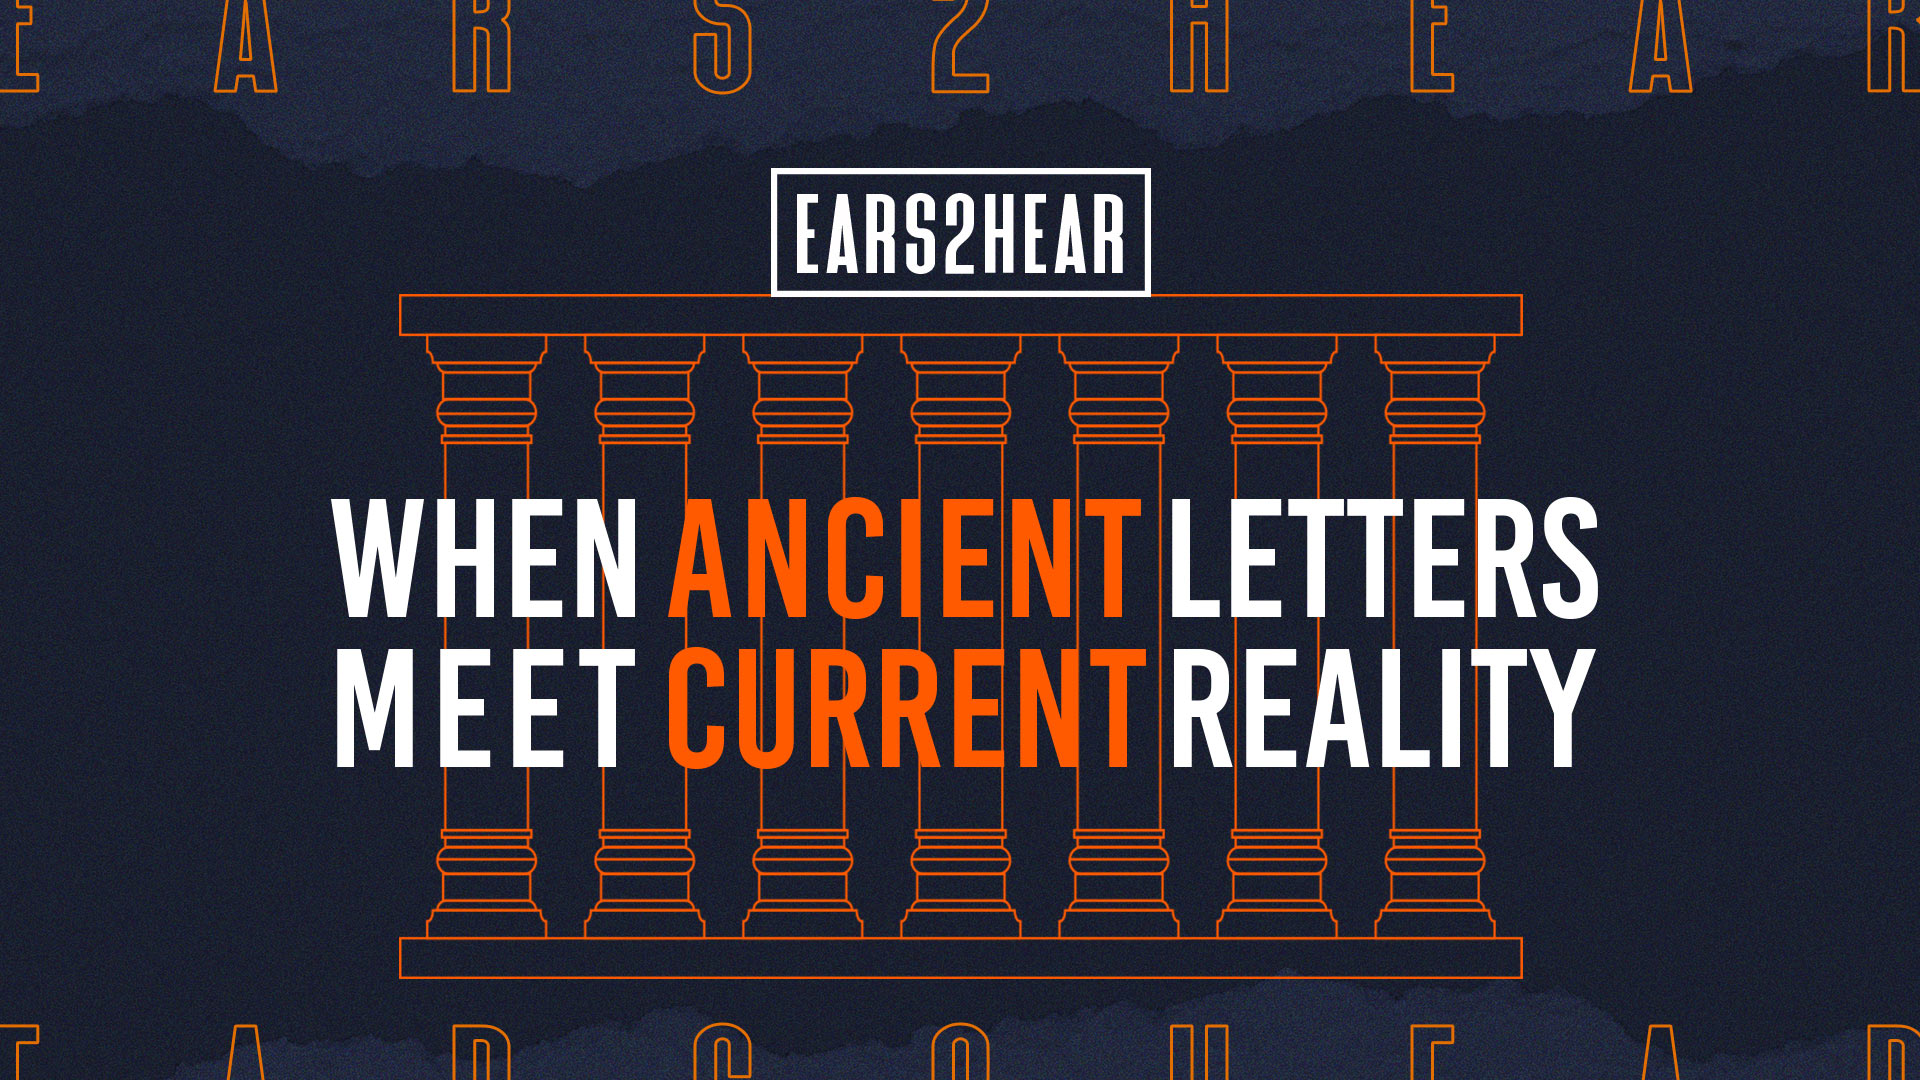    Ears2Hear: When Ancient Letters Meet Current Reality